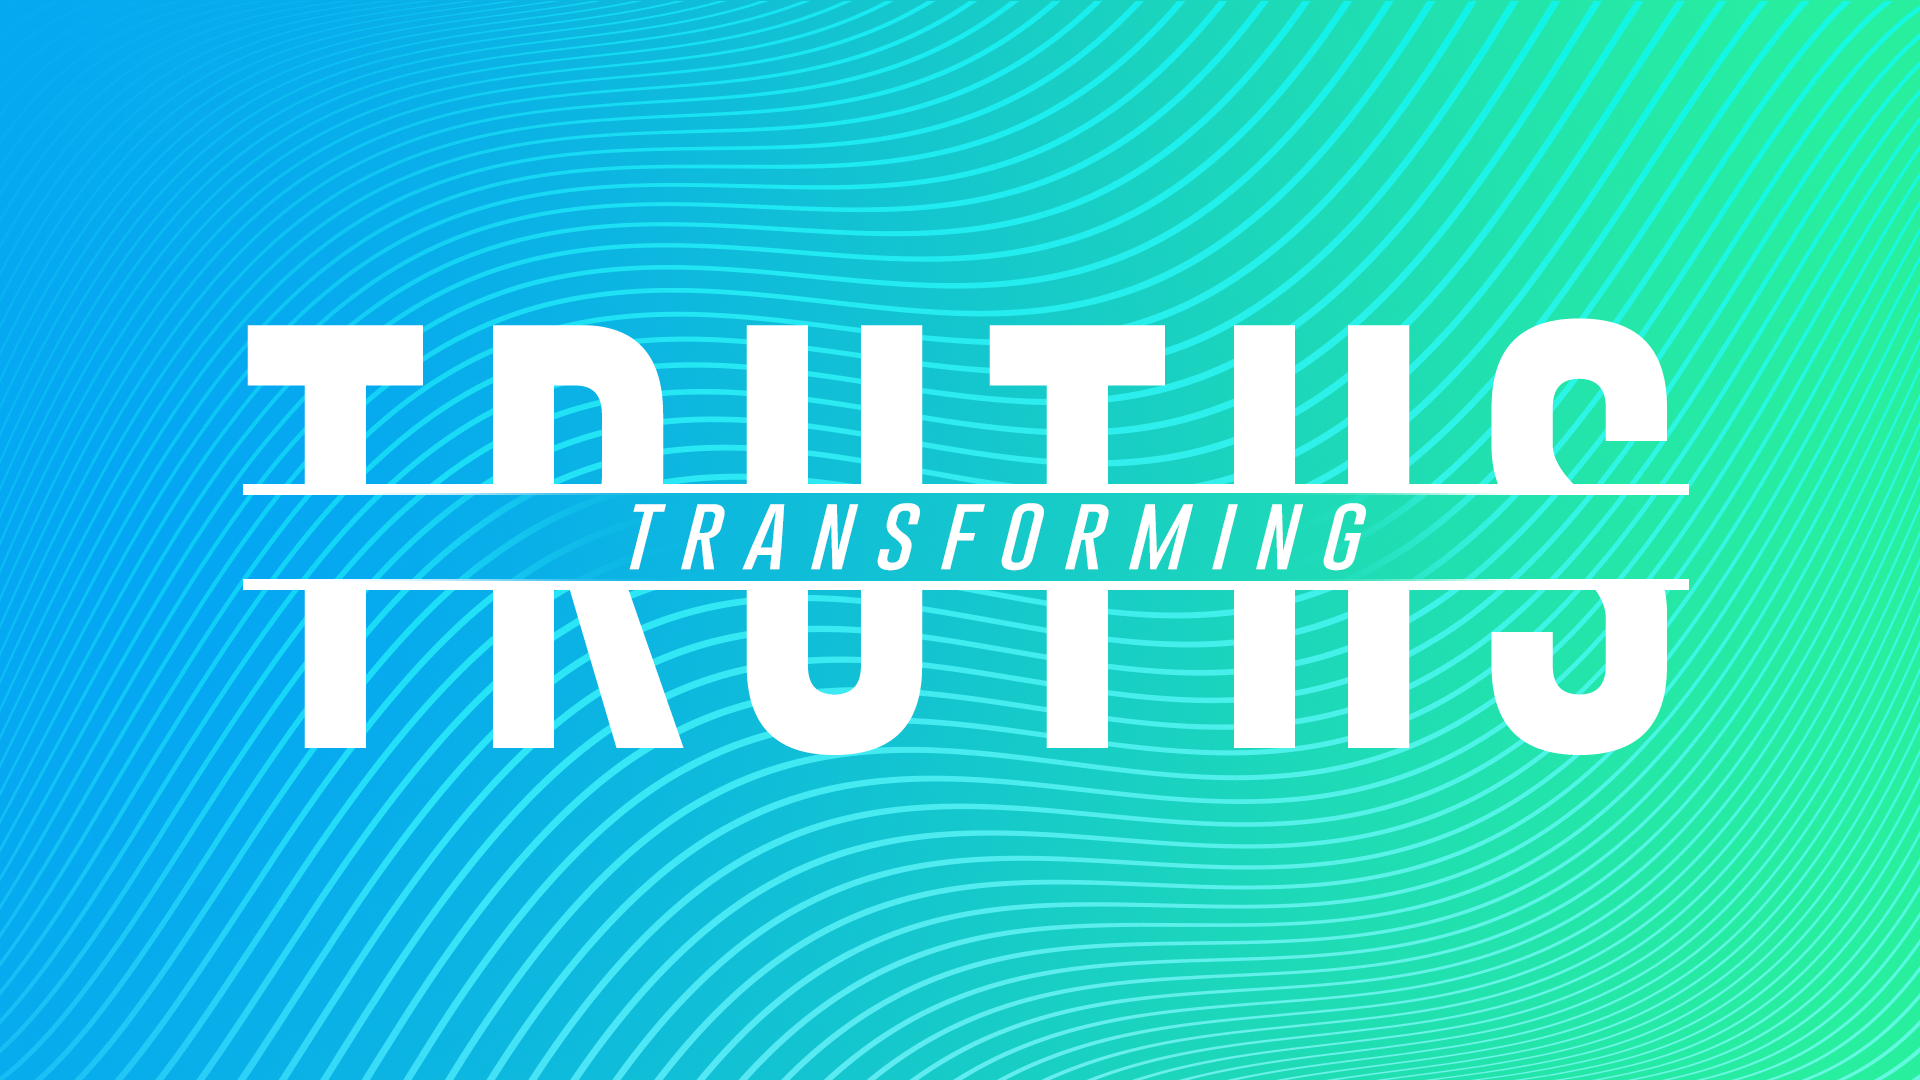 July 5, 2020 – Transforming Truths